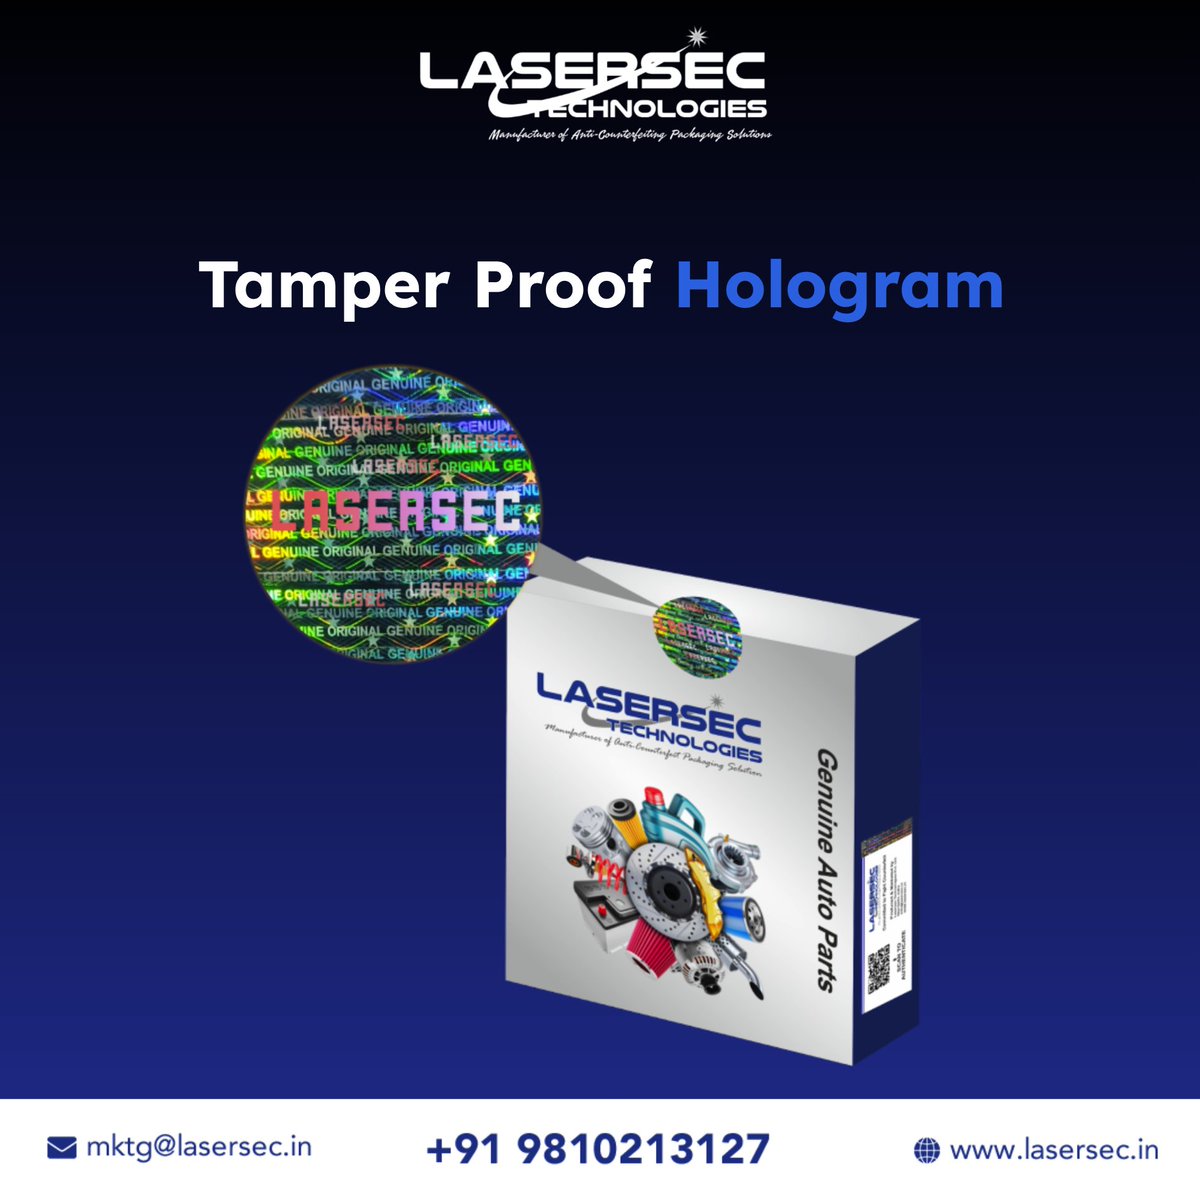 🟡 Unlock the potential of tamper-proof holograms in automotive security! 

Discover how holographic tech is raising security standards:  bit.ly/Automobile_Cou…  
.
.
#Lasersec #CounterfeitPrevention #AutomotiveSecurity #HologramTechnology